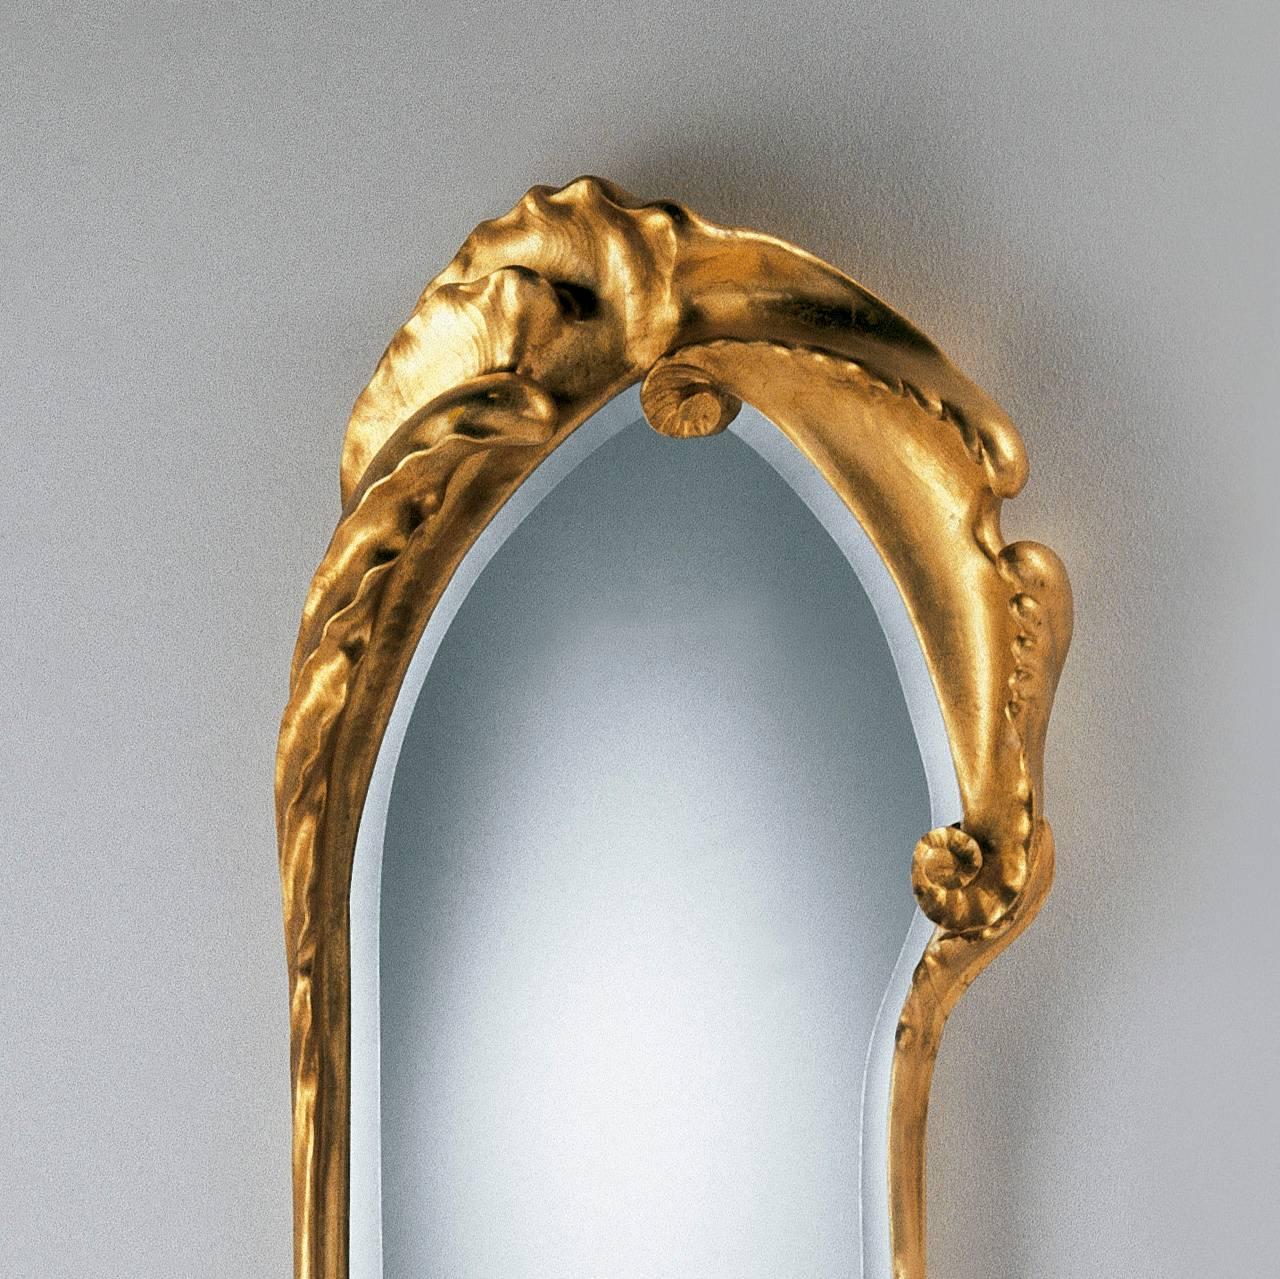 Mirror designed by Antoni Gaudí, circa 1902 and manufactured by BD furniture in Barcelona.

Solid oak: varnished or covered in fine gold leaf.

Measures: 58cm x 195cm

Year: 1902

Antoni Gaudí (1852/1926) is, without doubt, the most